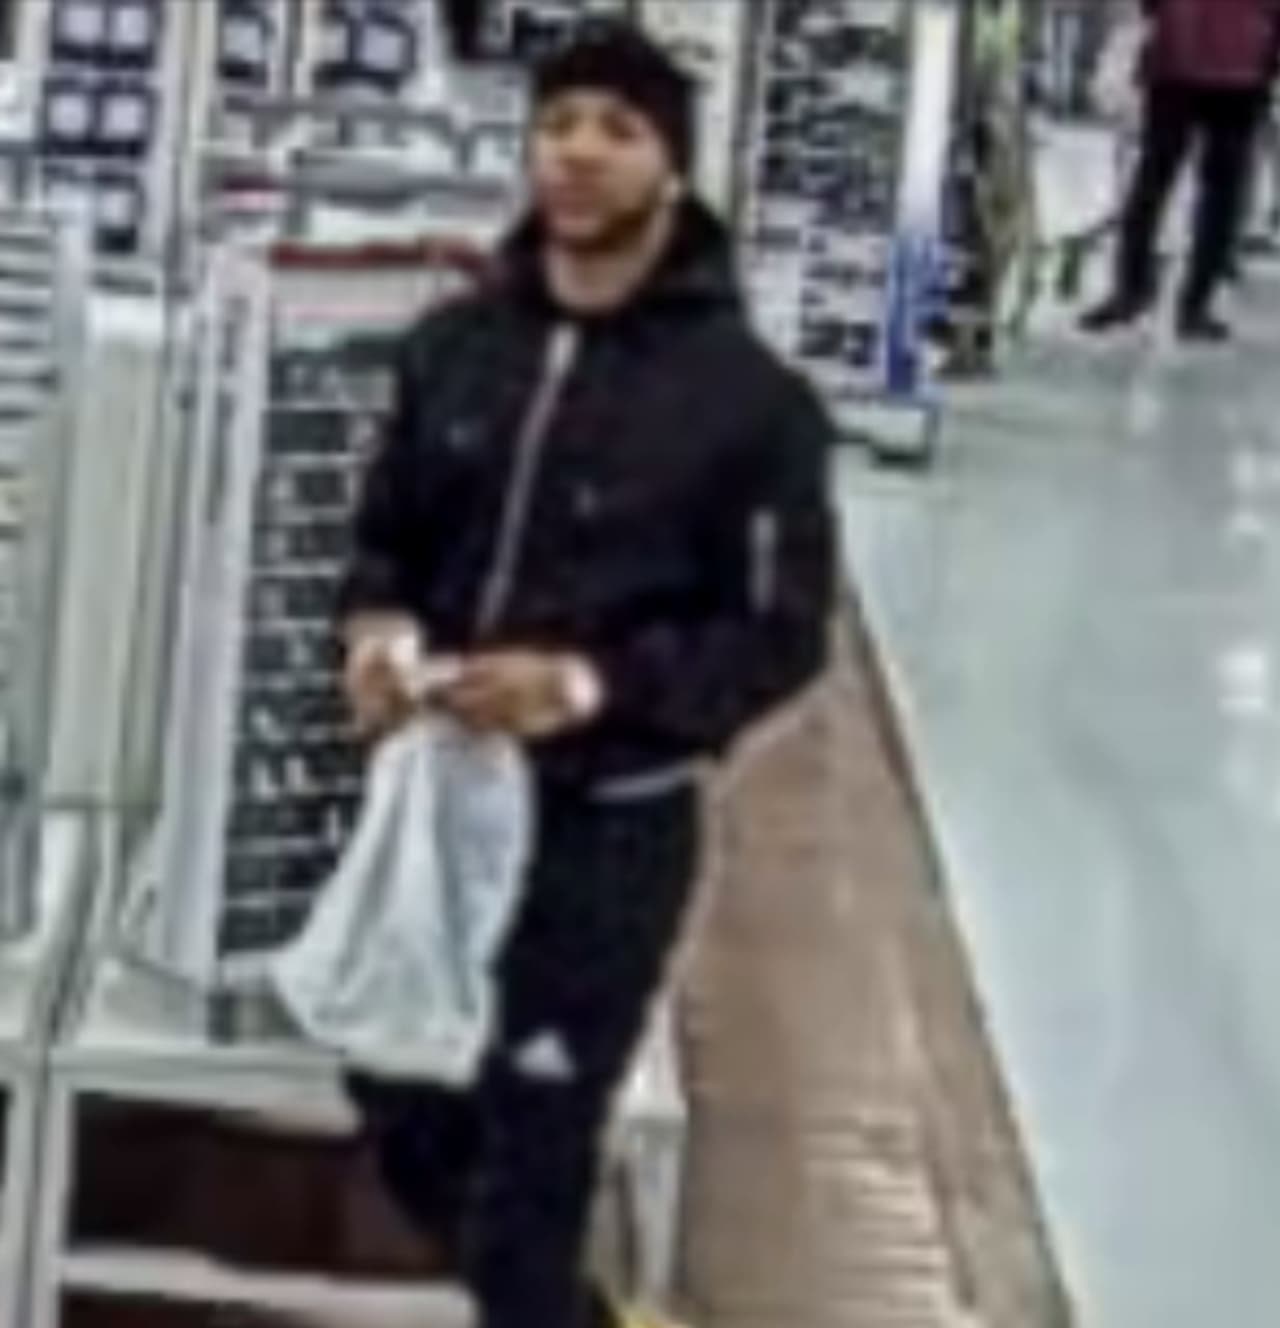 The thief used the stolen credit cards at the Walmart in Secaucus, police said.